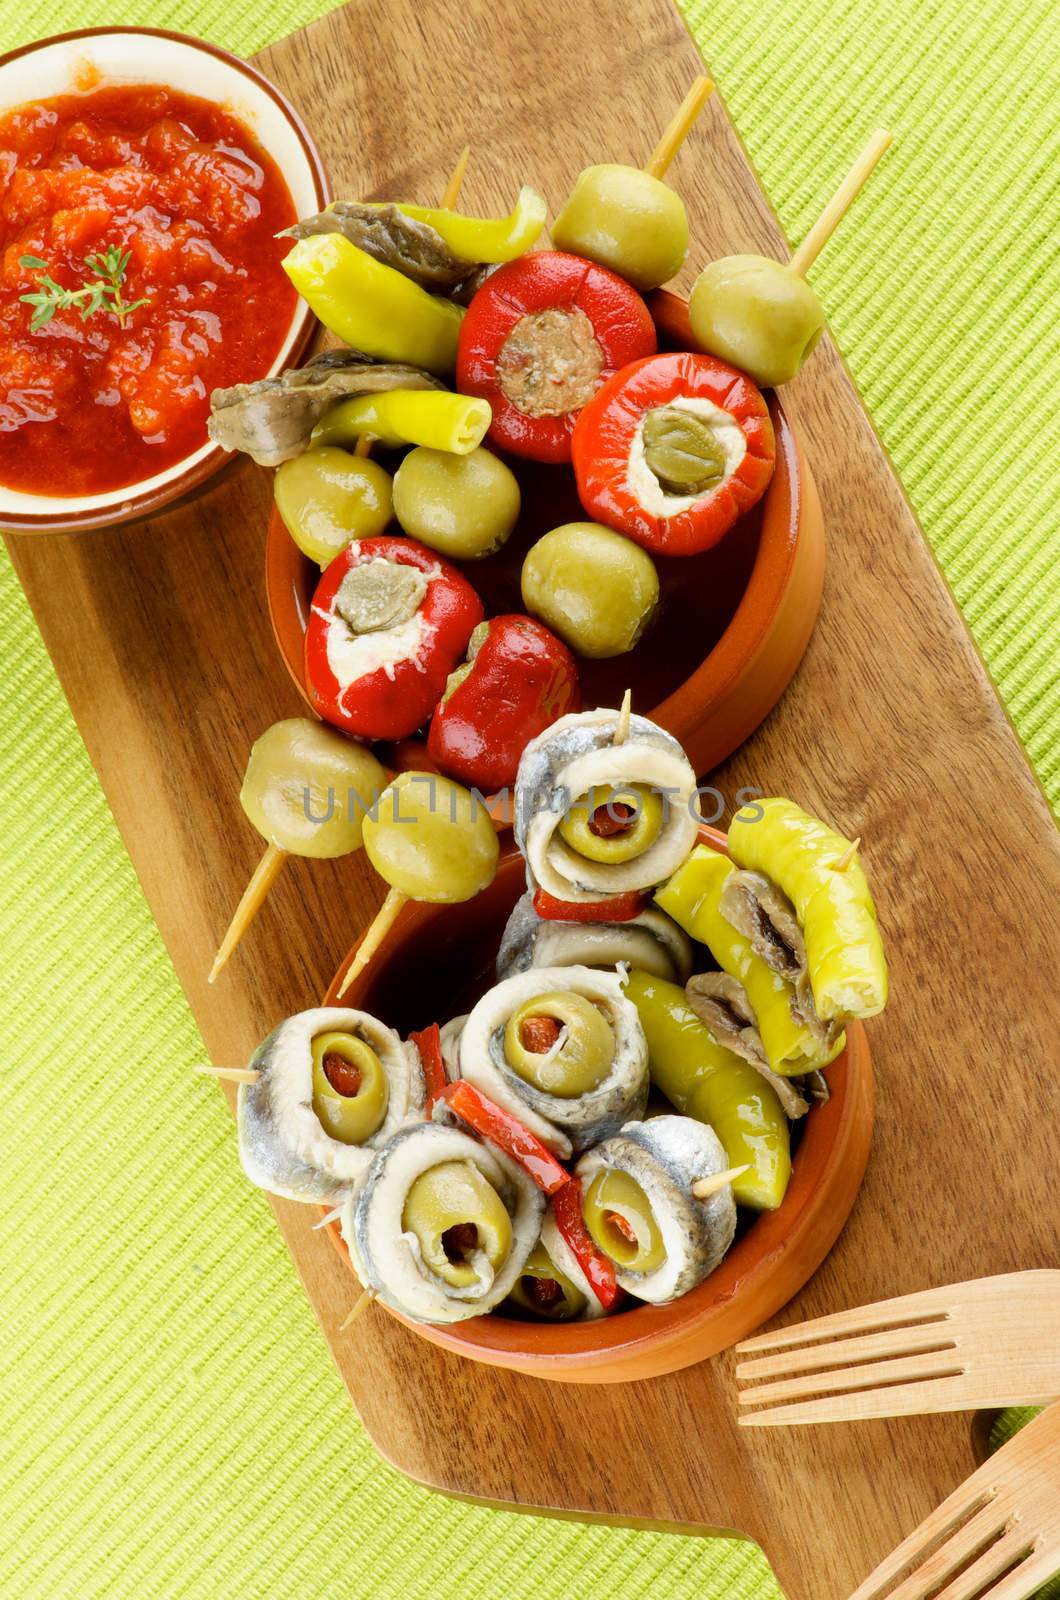 Delicious Spanish Snacks with Stuffed Small Peppers, Anchovies, Green Olives and Tomatoes Sauce with Bread Sticks in Various Bowls closeup on Green Napkin. Top View